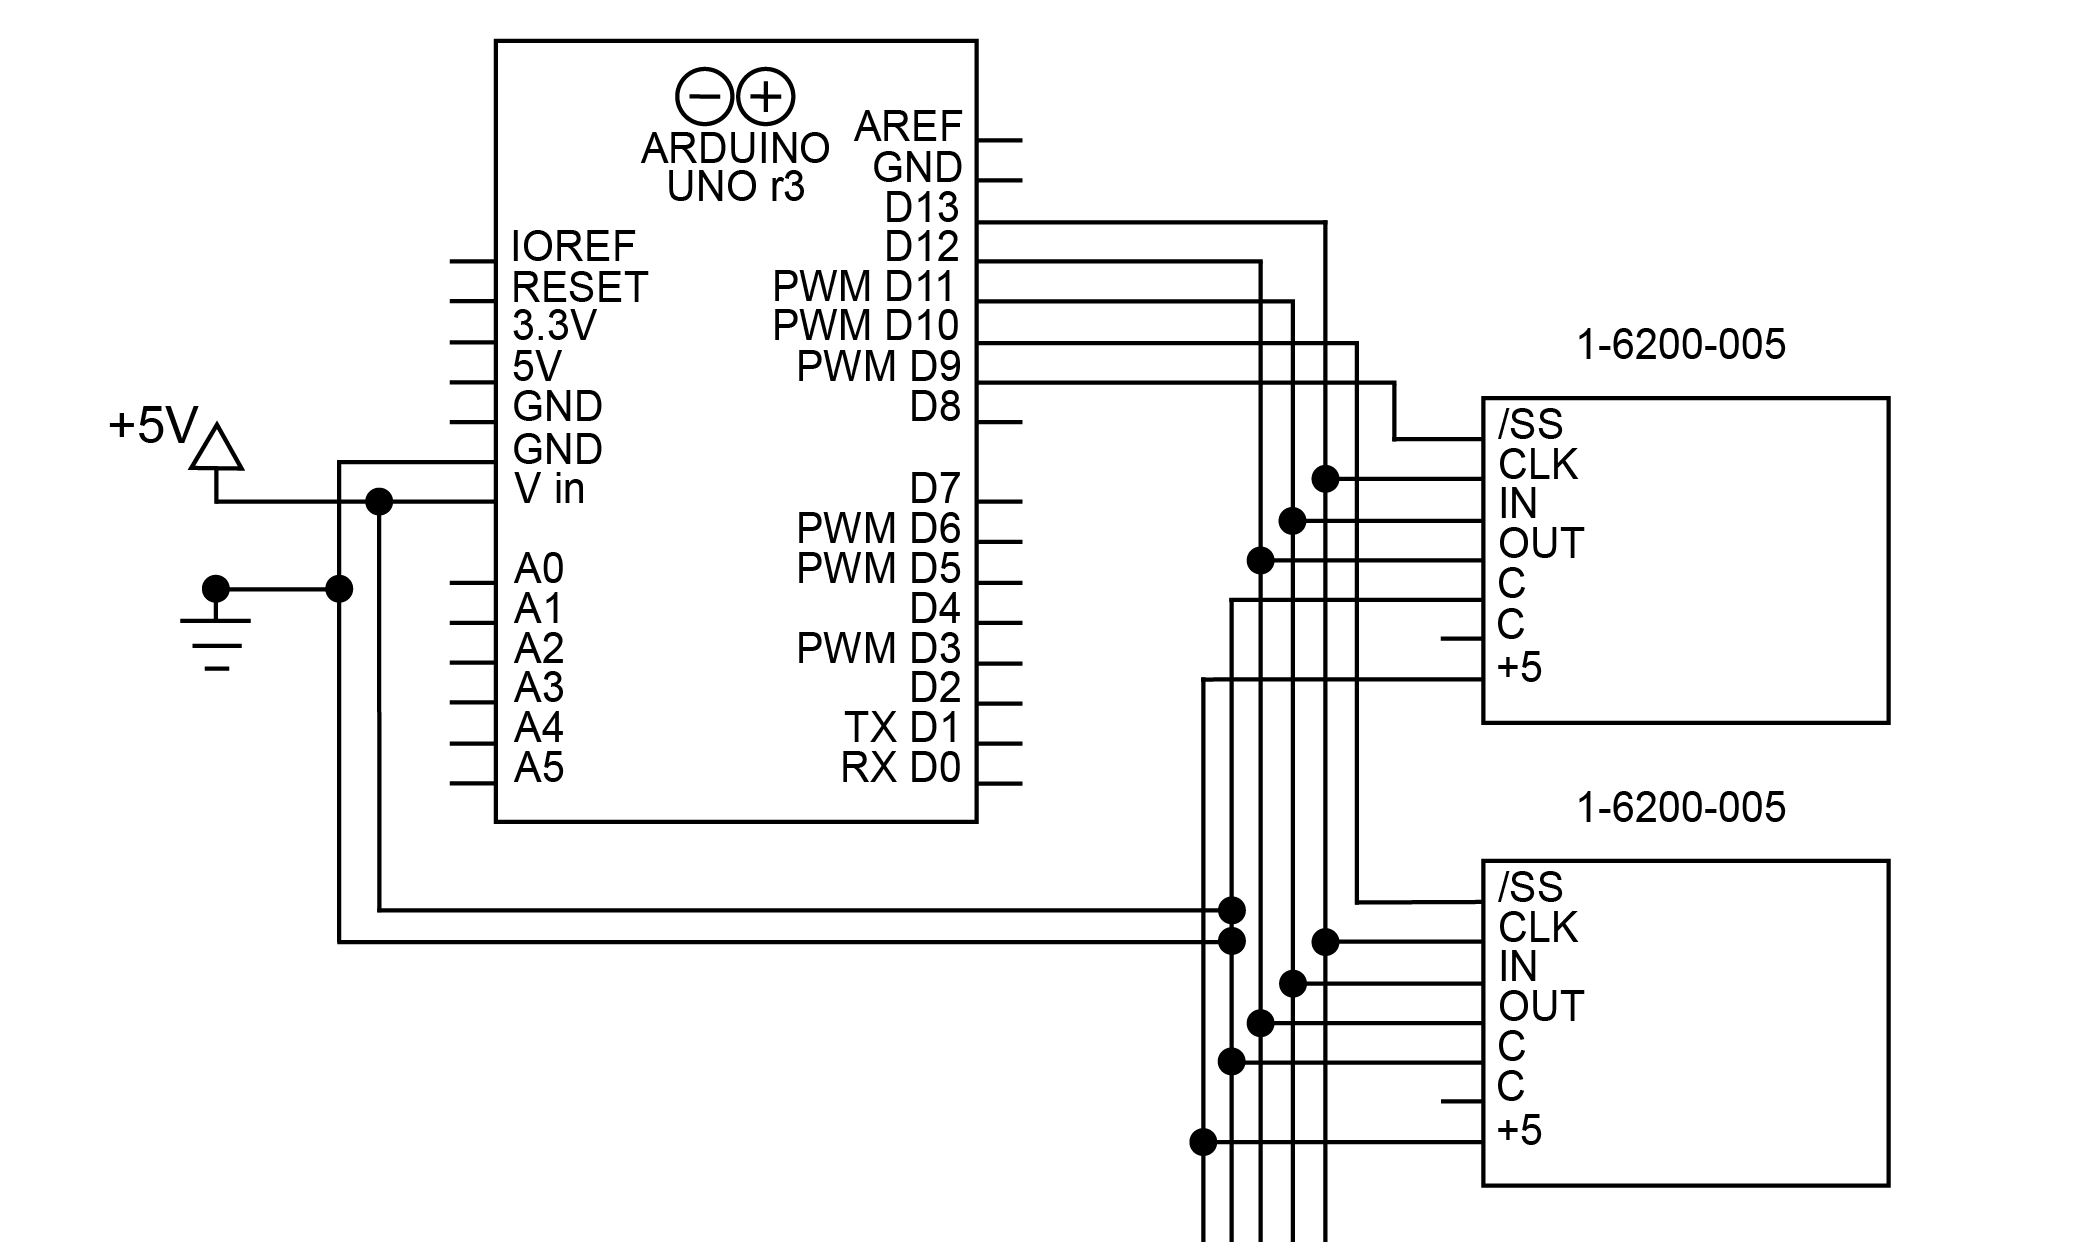 Wiring Schematic for the 1-6200-005 SPI Bus signal conditioners with an Arduino Uno